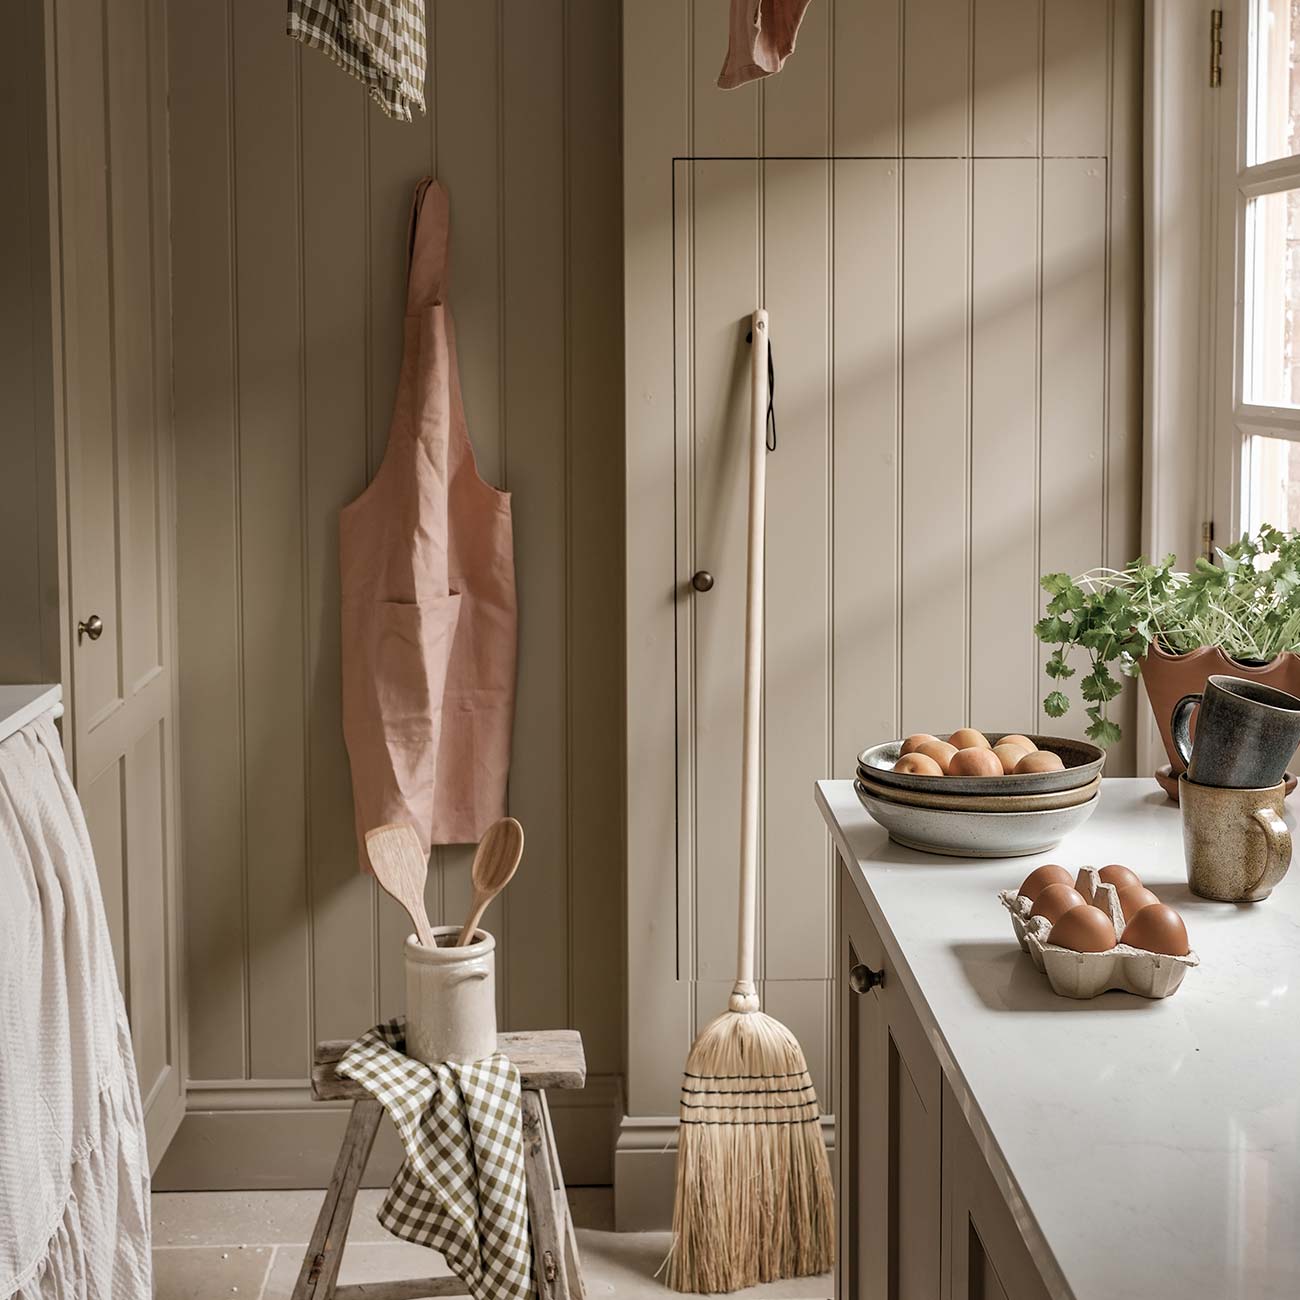 Warm Clay Linen Apron and Botanical Green Gingham Tea Towels,